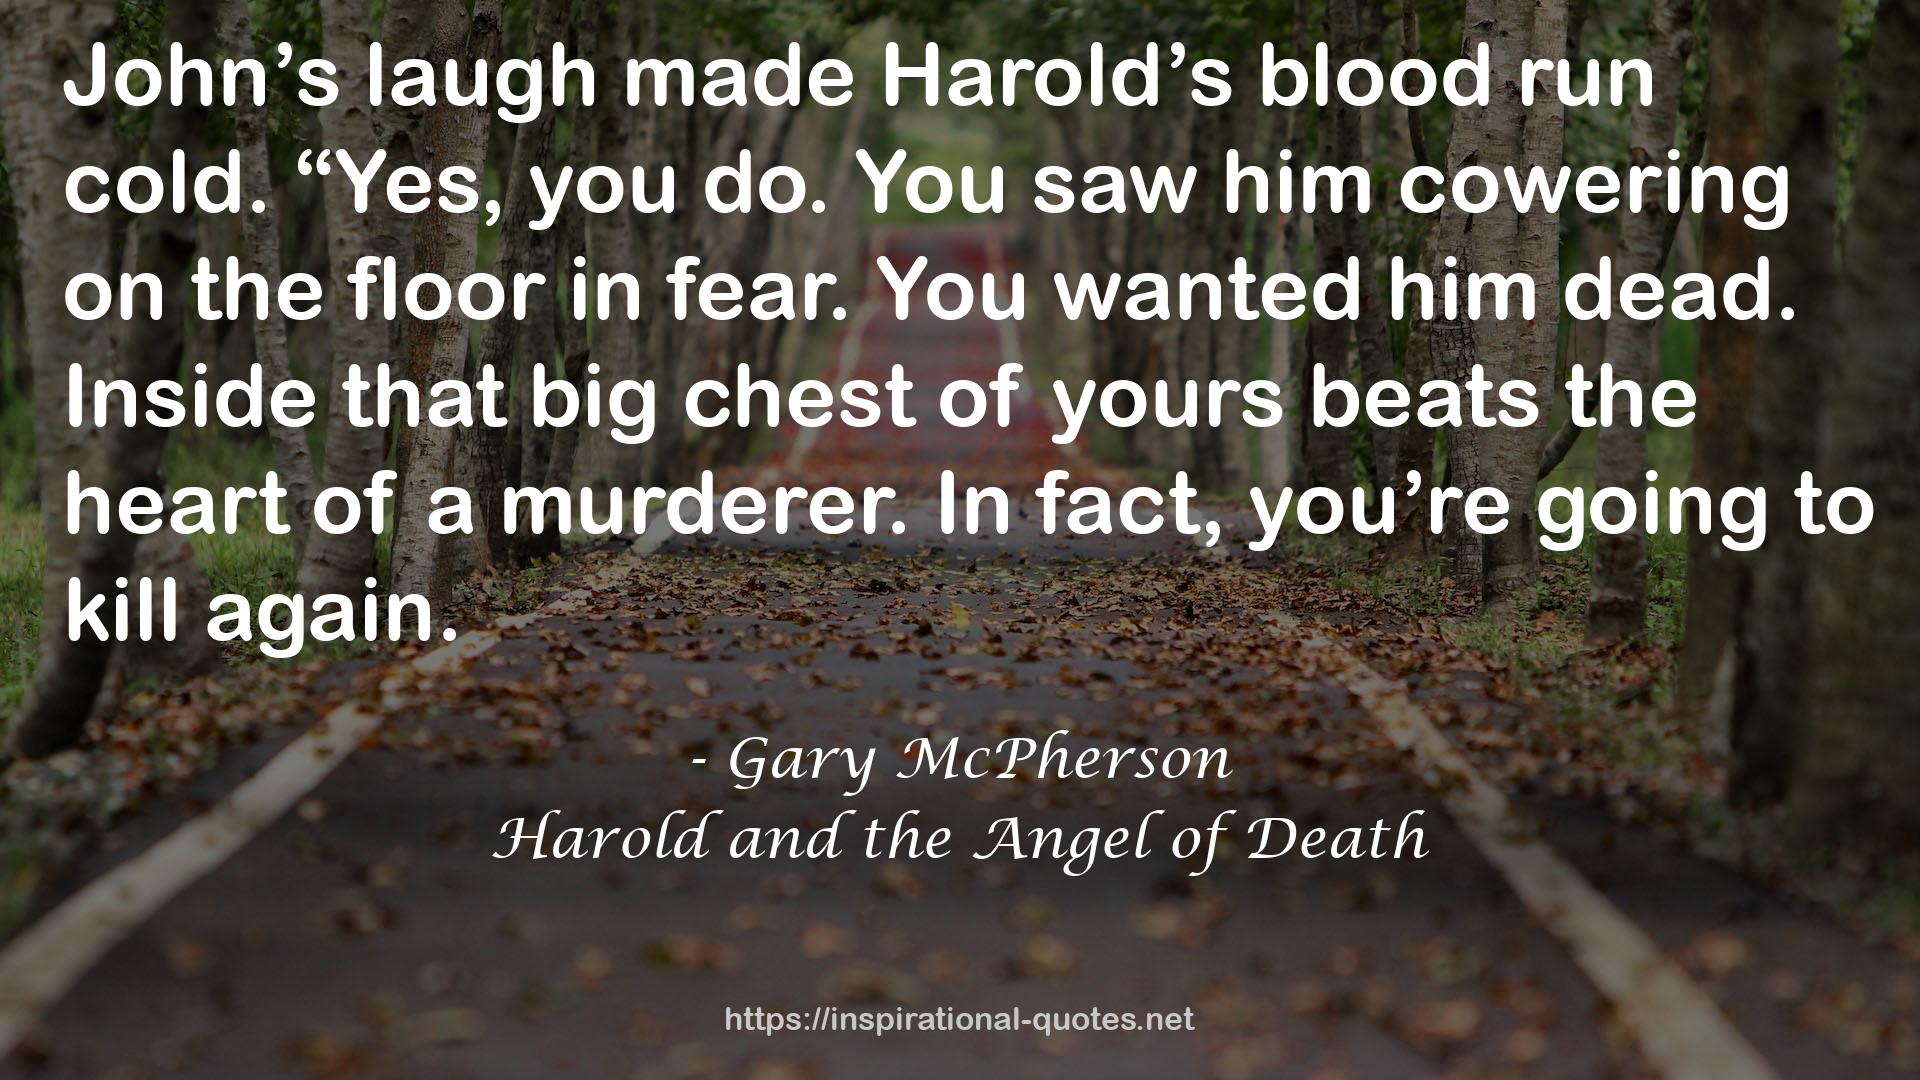 Harold and the Angel of Death QUOTES